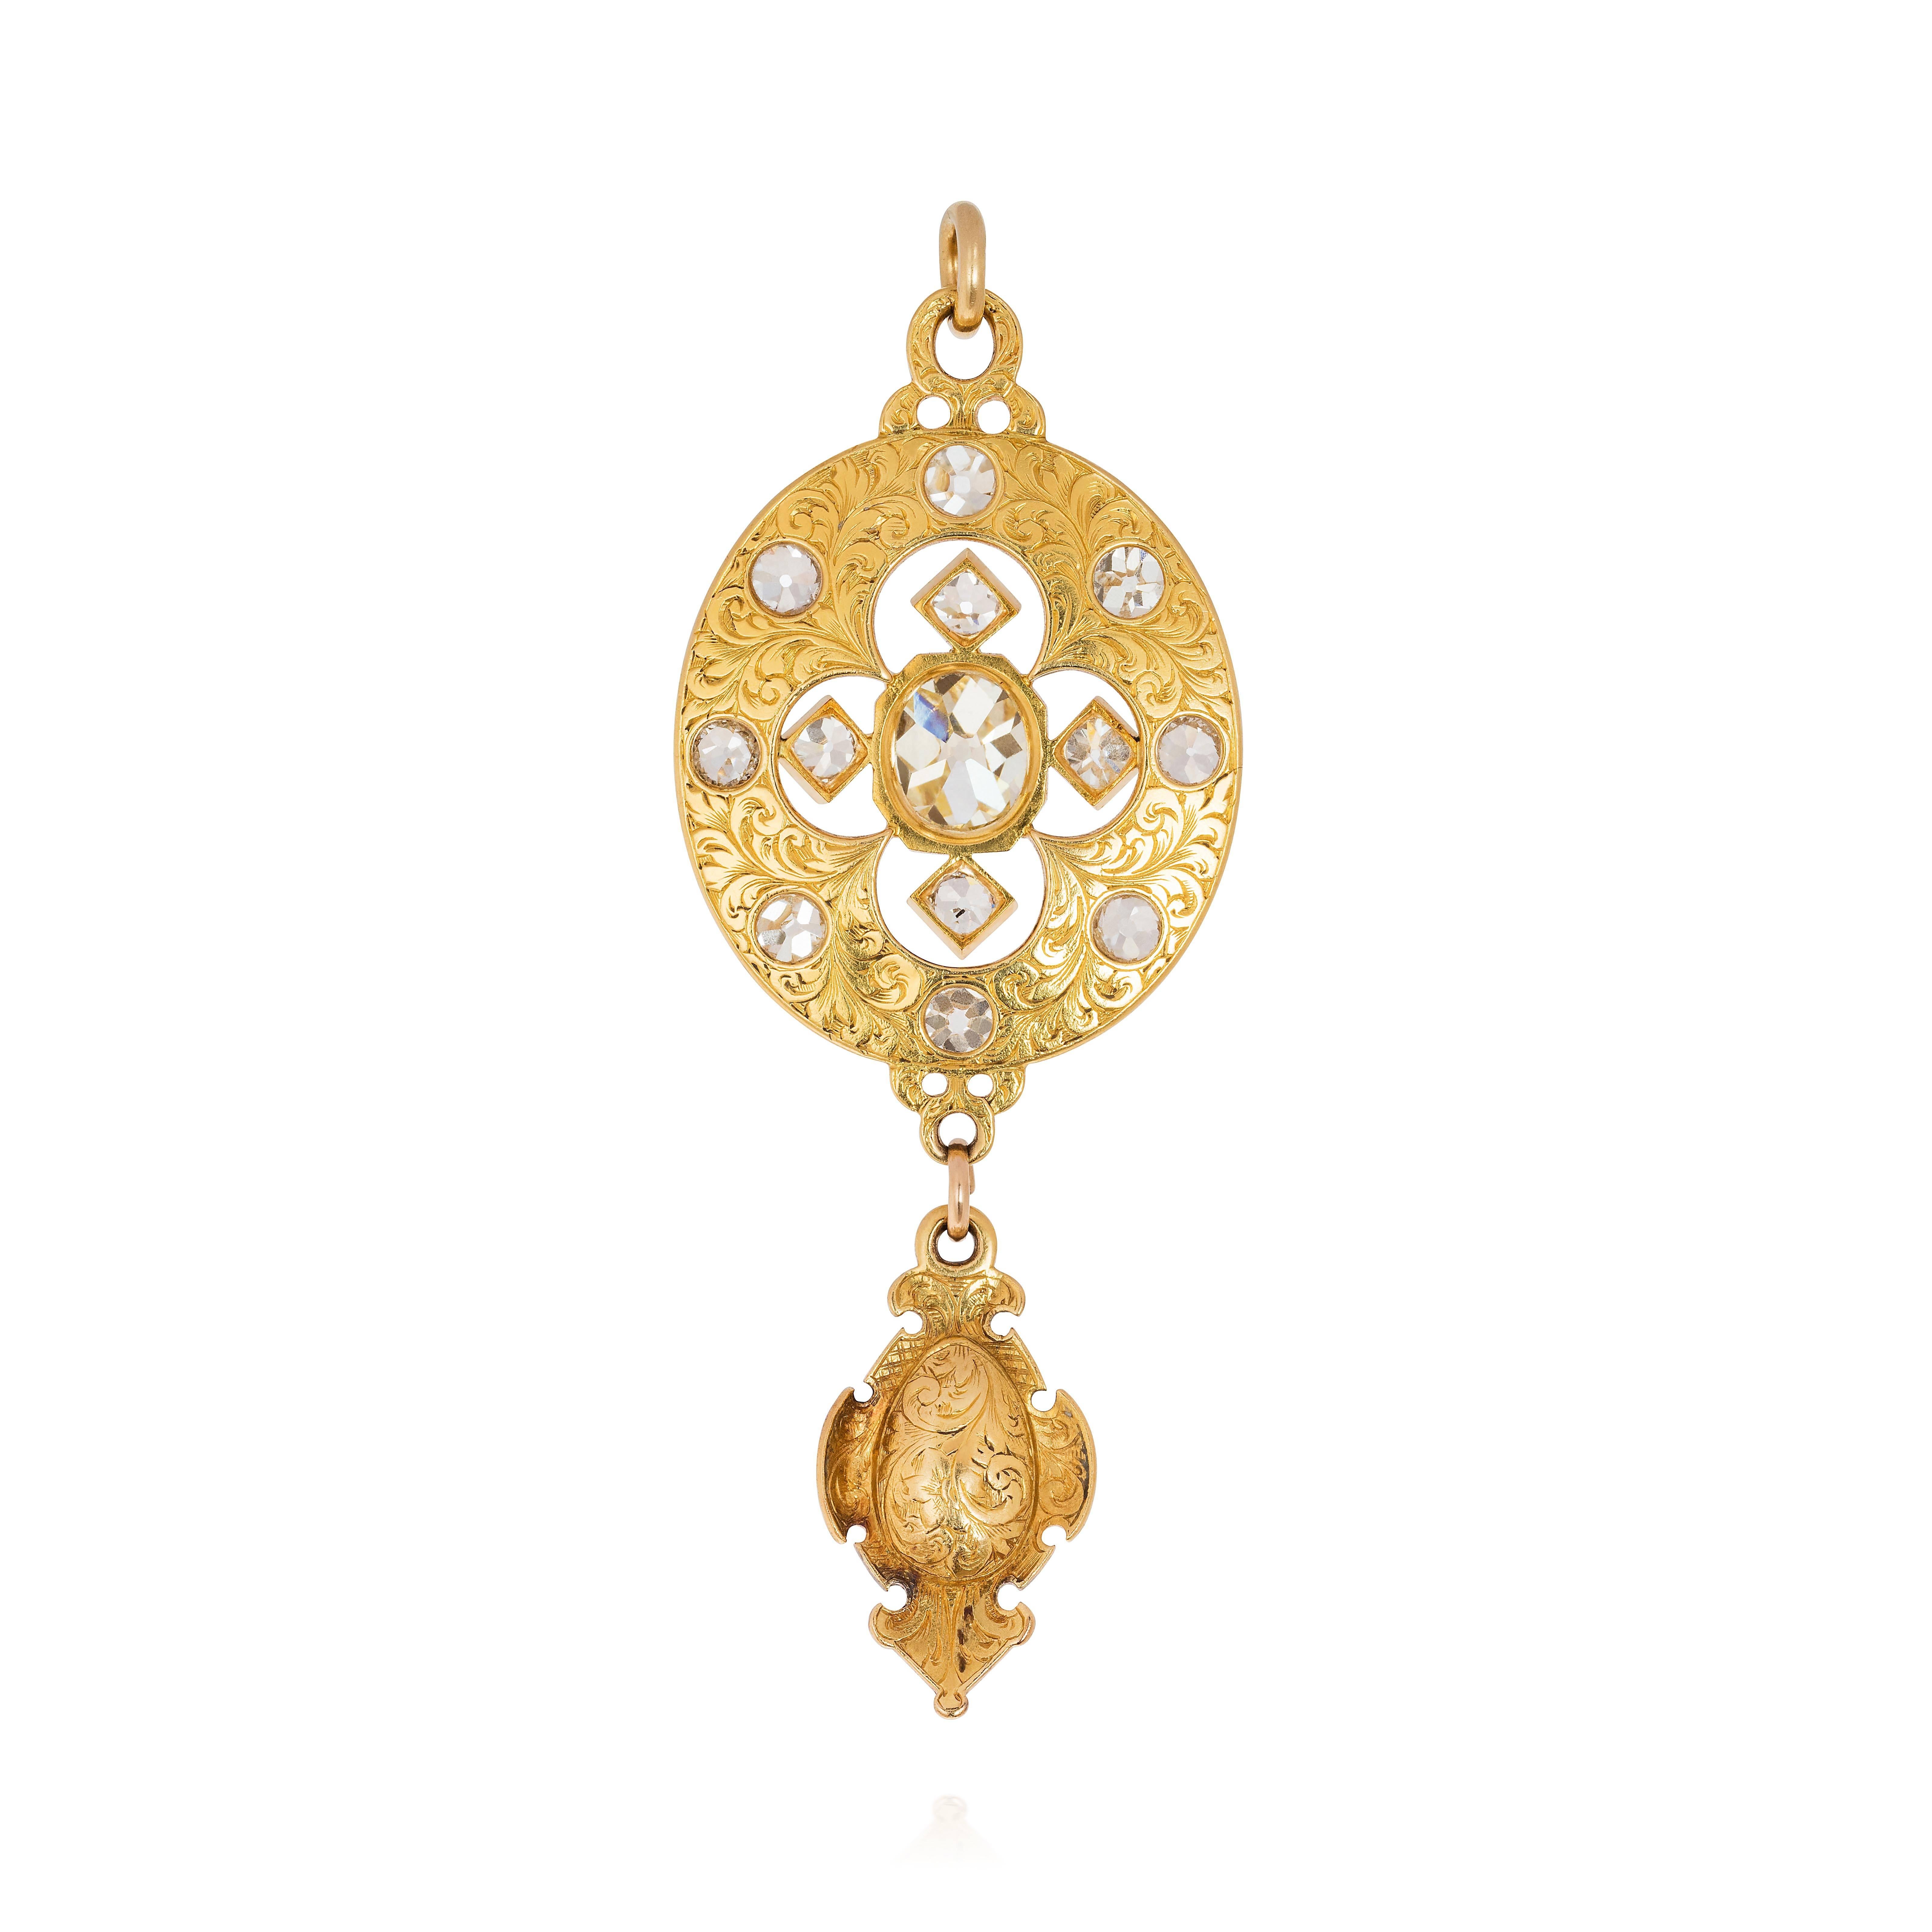 And enamel diamond and garnet Holbeinesque pendant, the central openwork quatrefoil set with old brilliant-cut diamonds, to an oval polychrome champlevé enamelled plaque, highlighted by cushion-shaped diamonds, suspending a lozenge-shaped plaque set